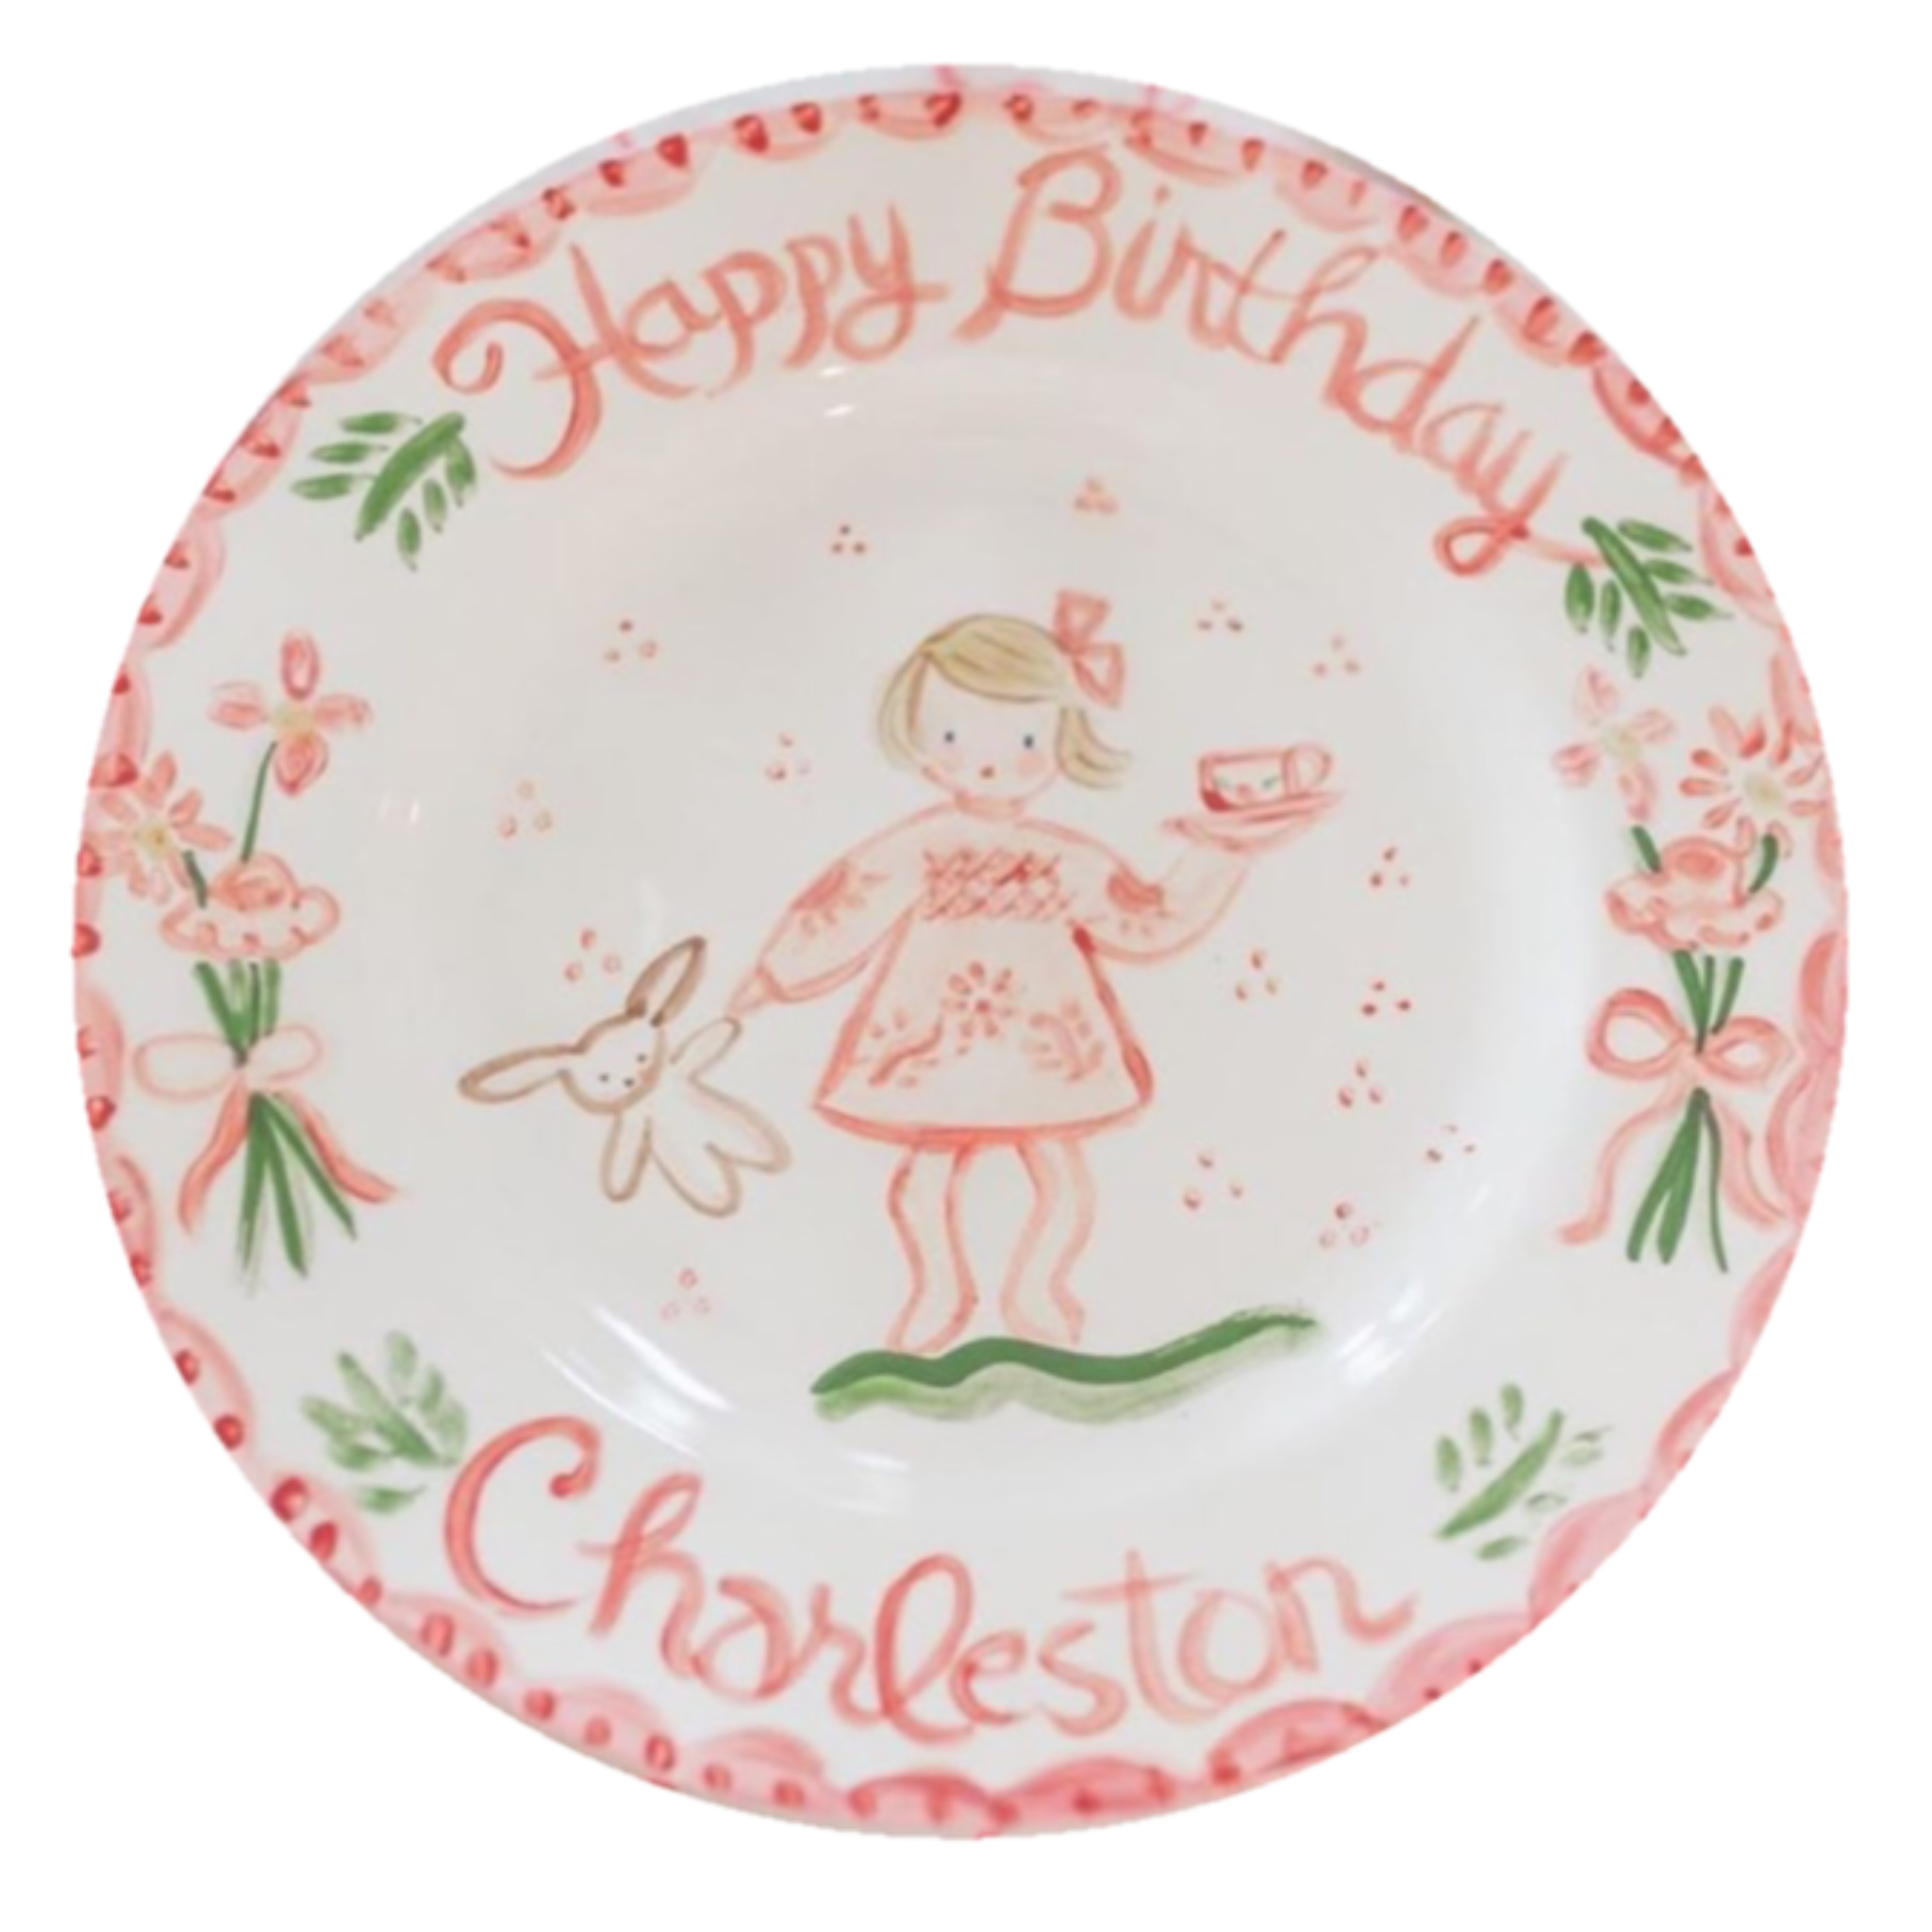 Birthday Plate -Pink/Green - Tricia Lowenfield Design